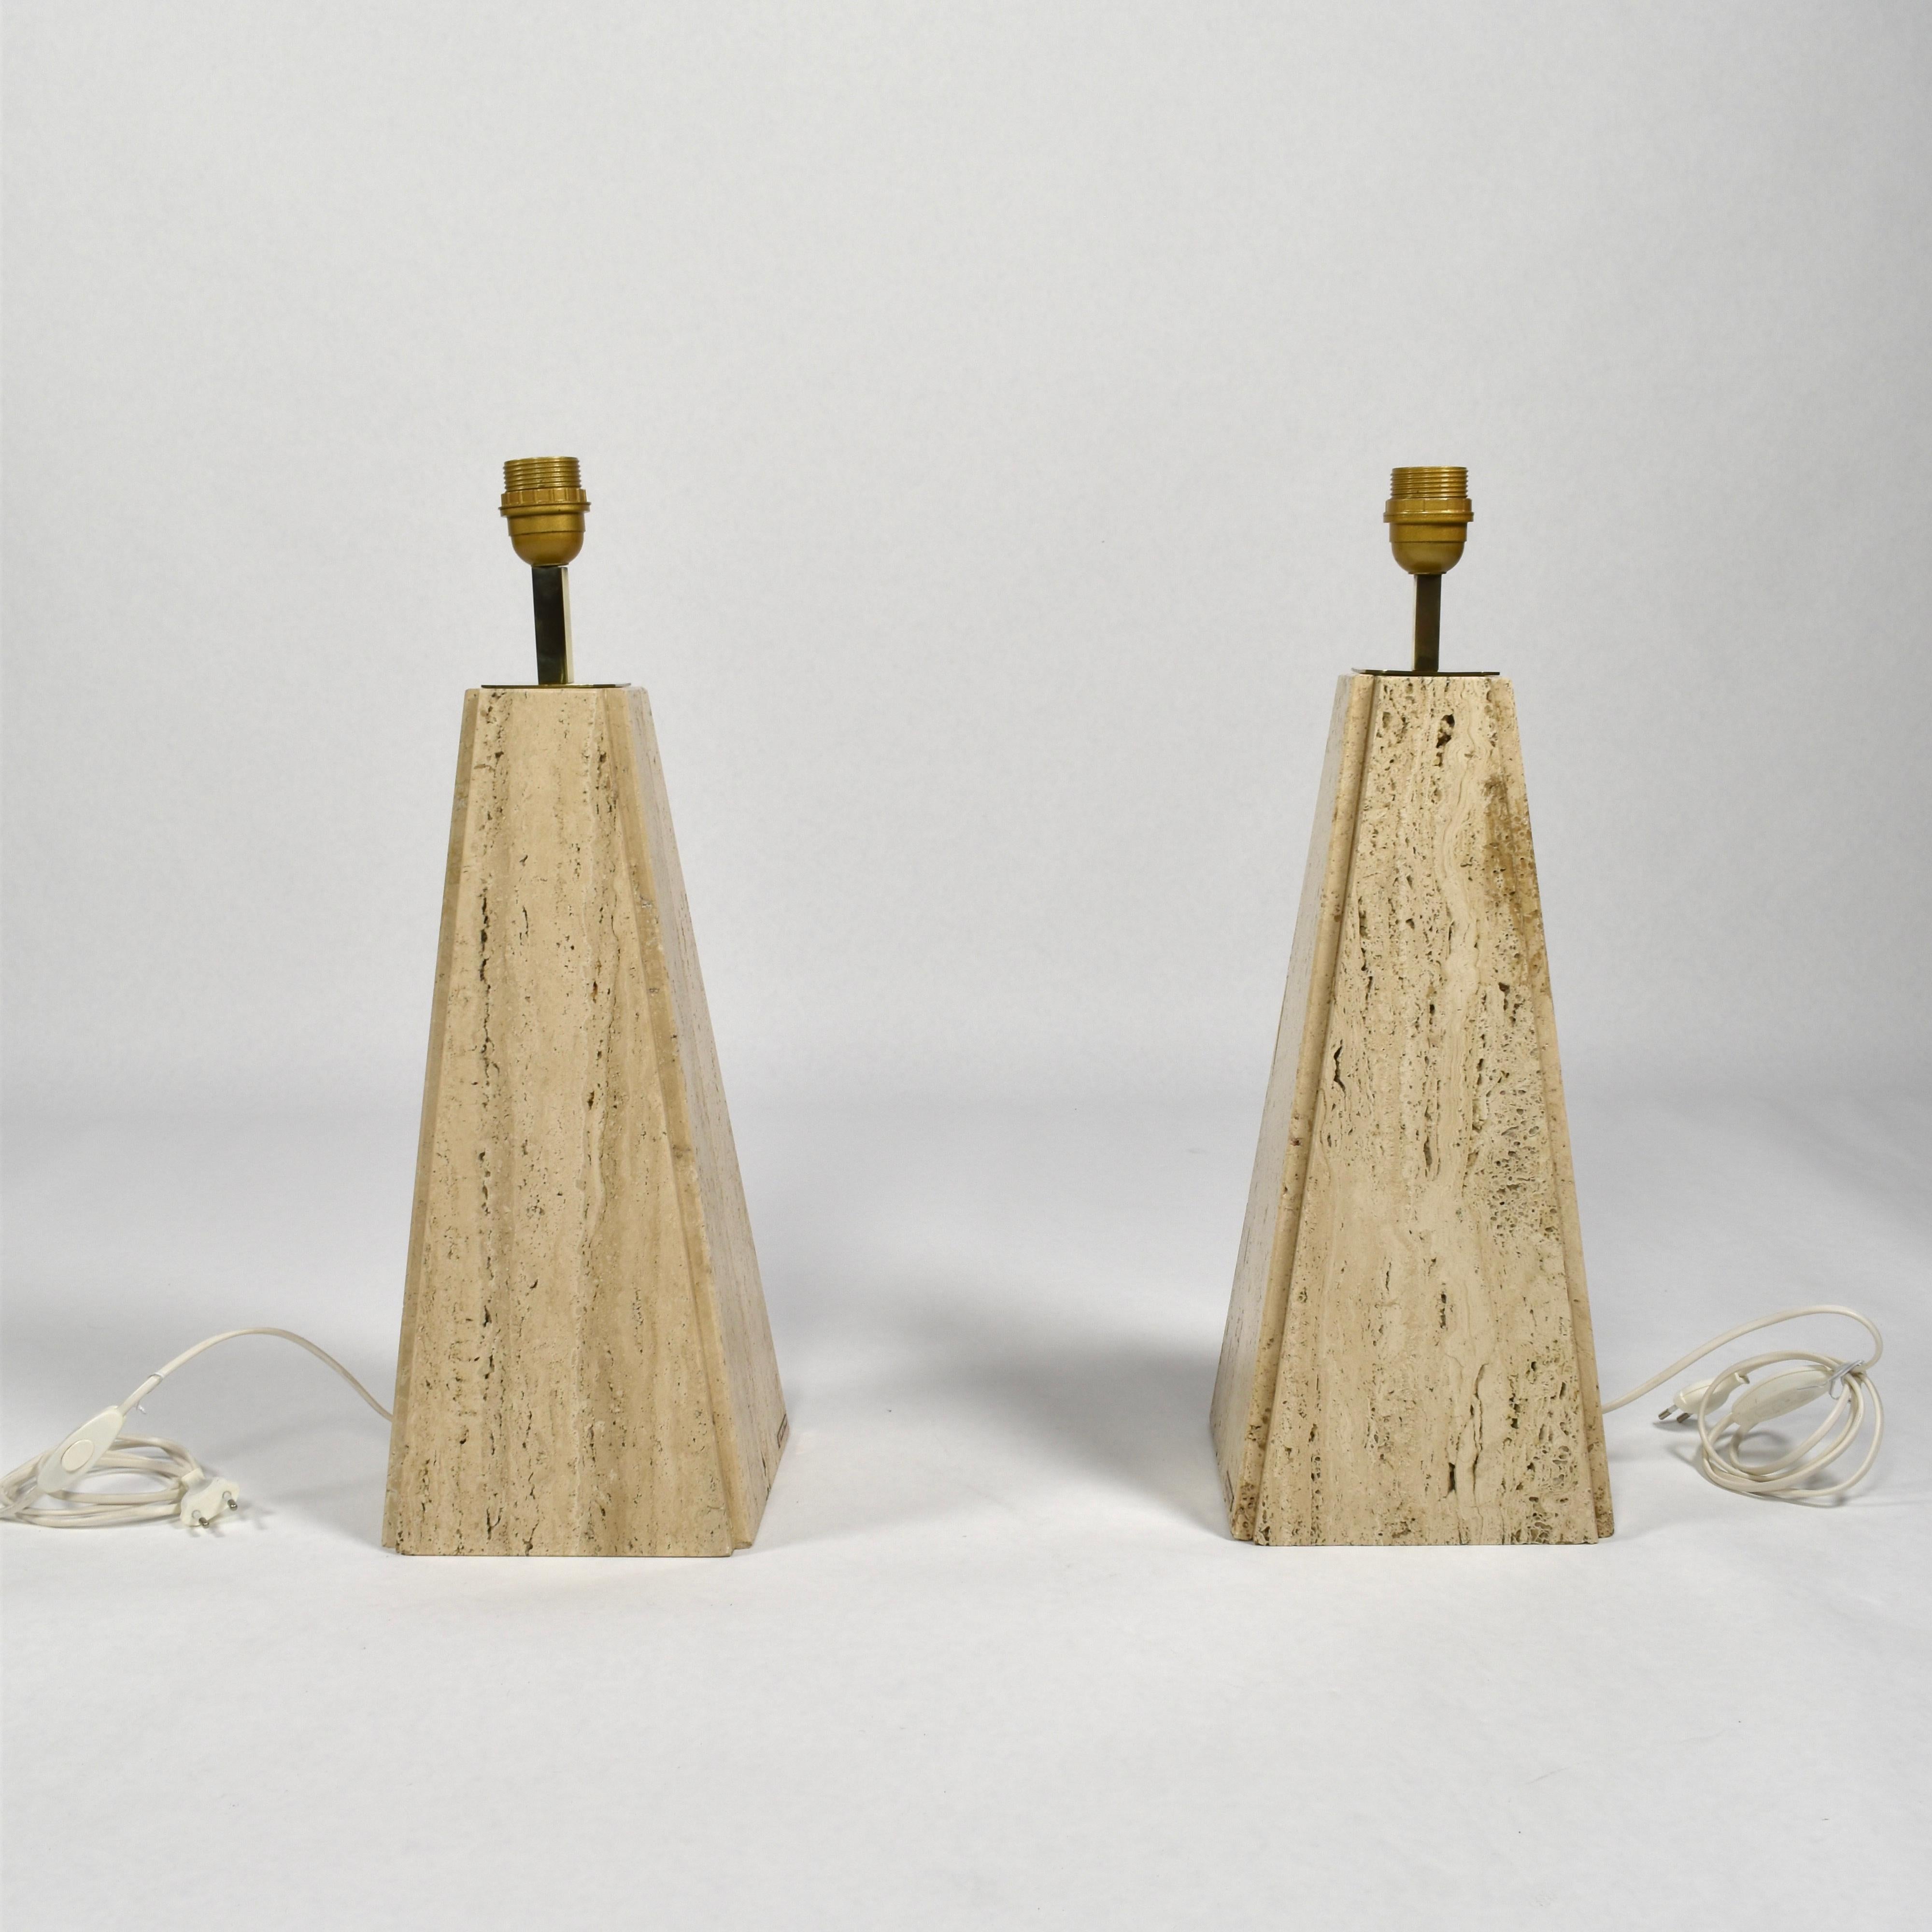 Pair of Camille Breesch Travertine and Brass Table Lamps, Belgium, circa 1970 4